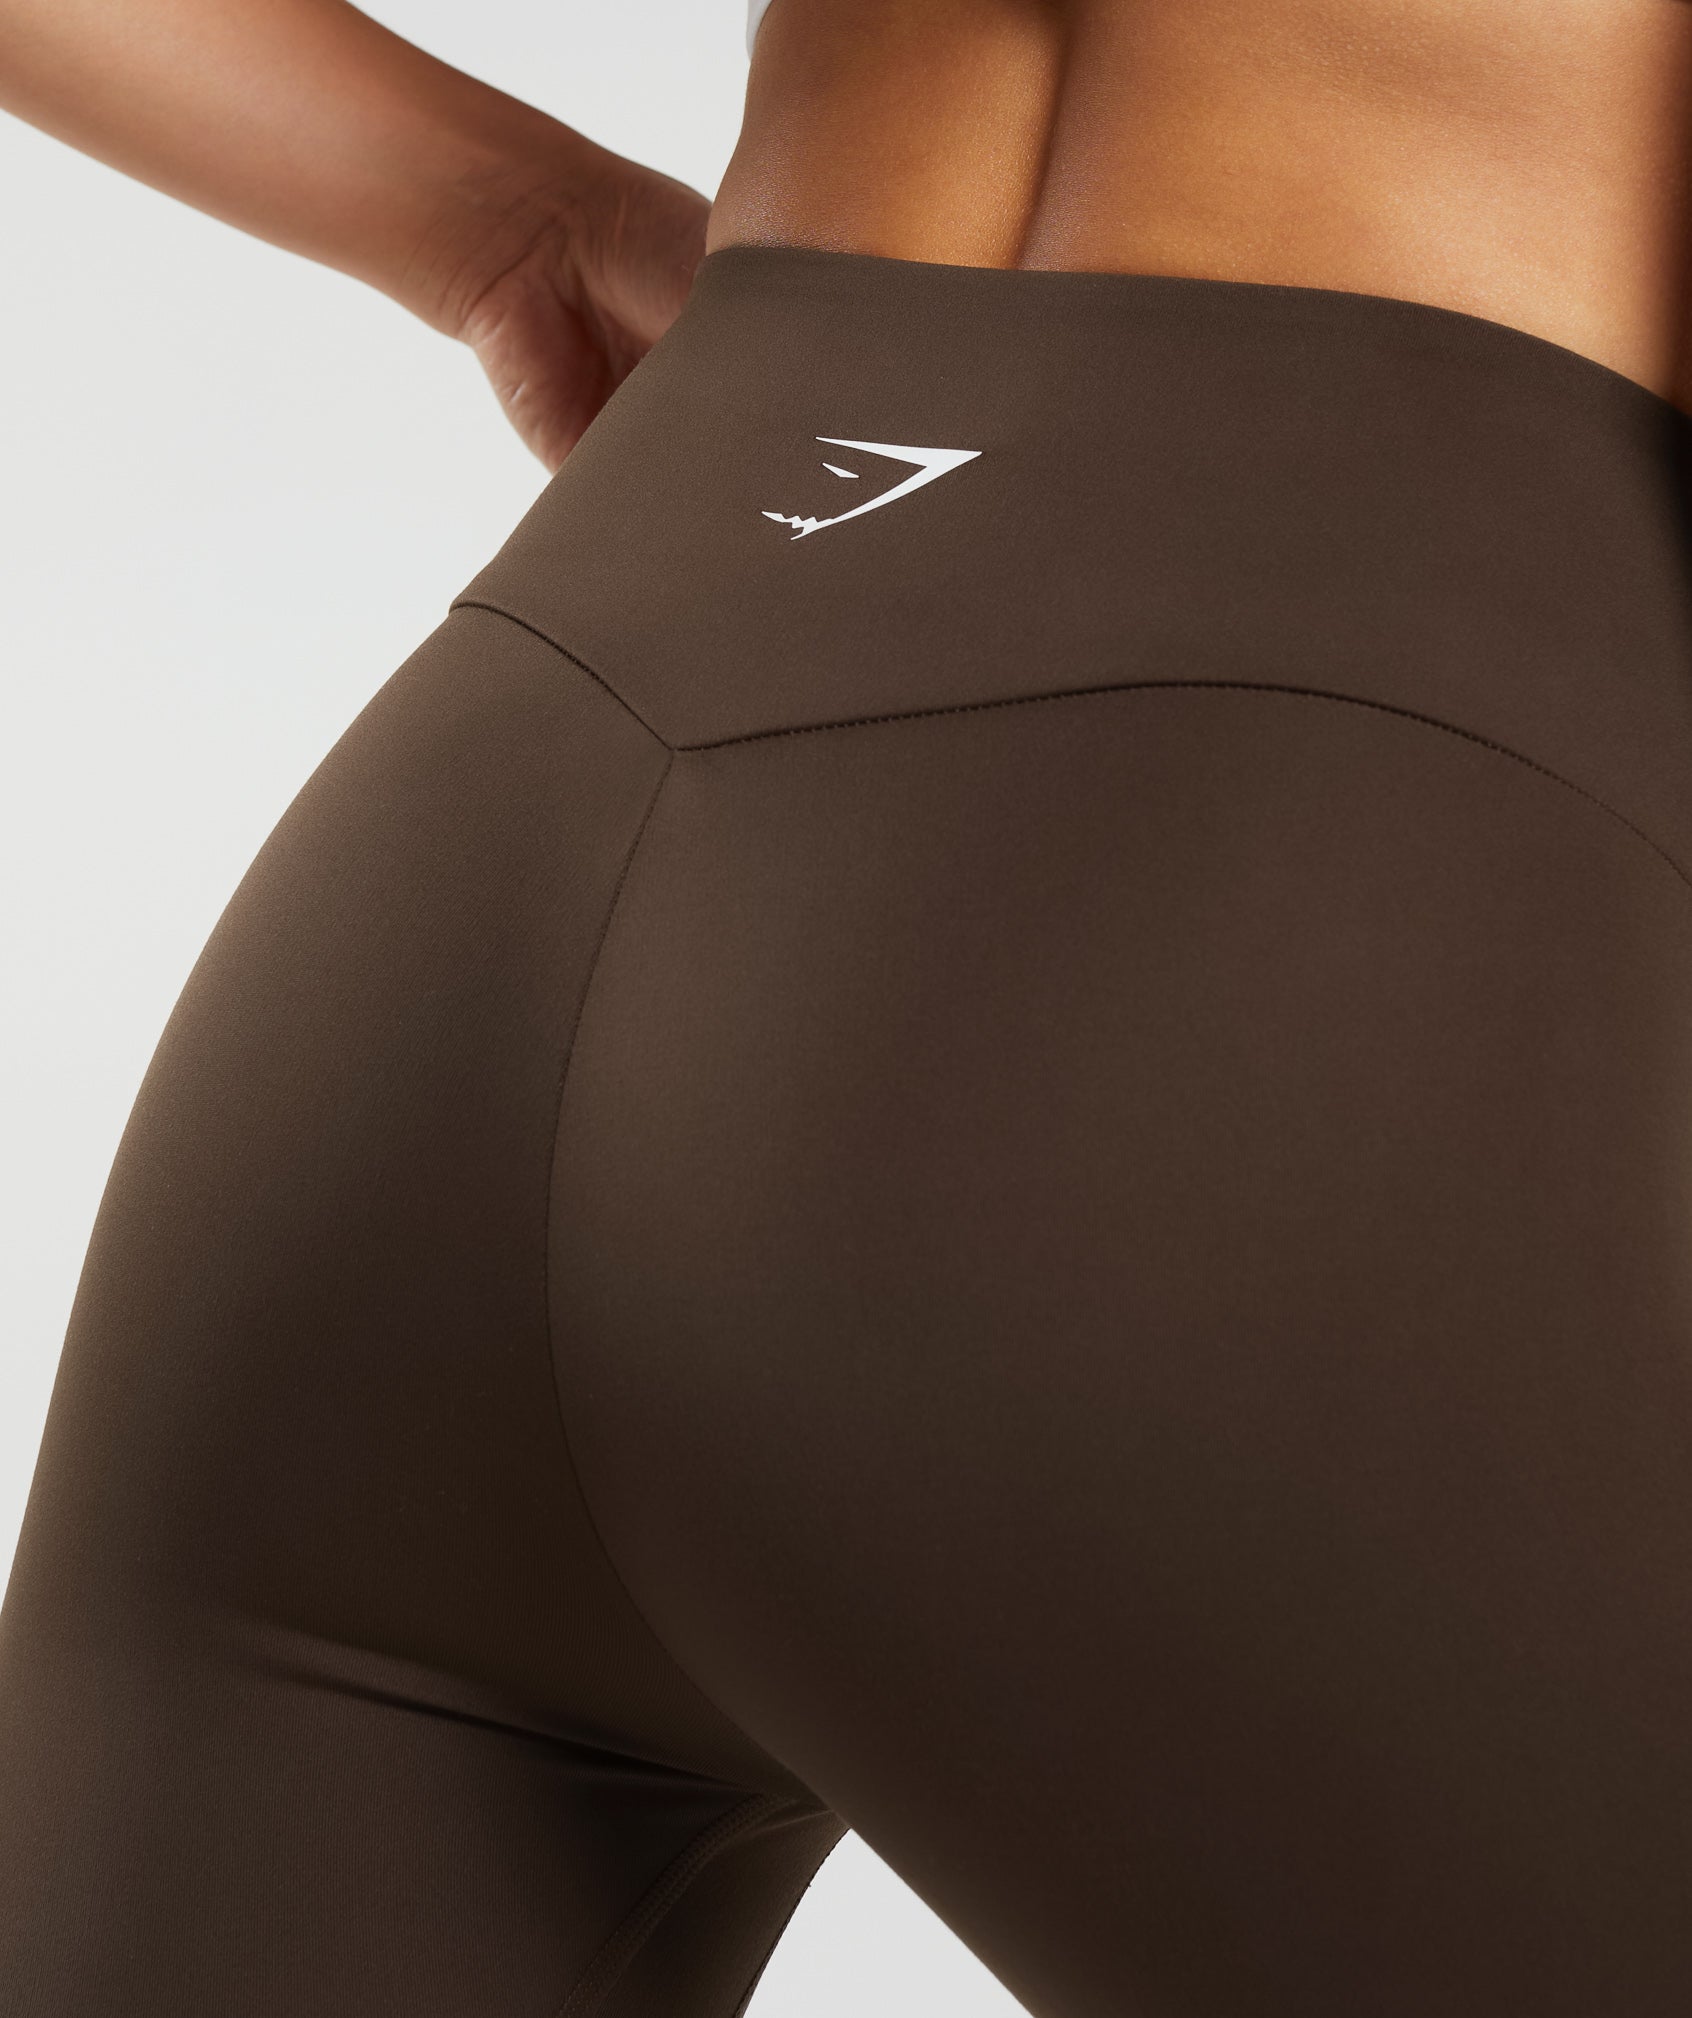 Fraction Leggings in Archive Brown - view 6